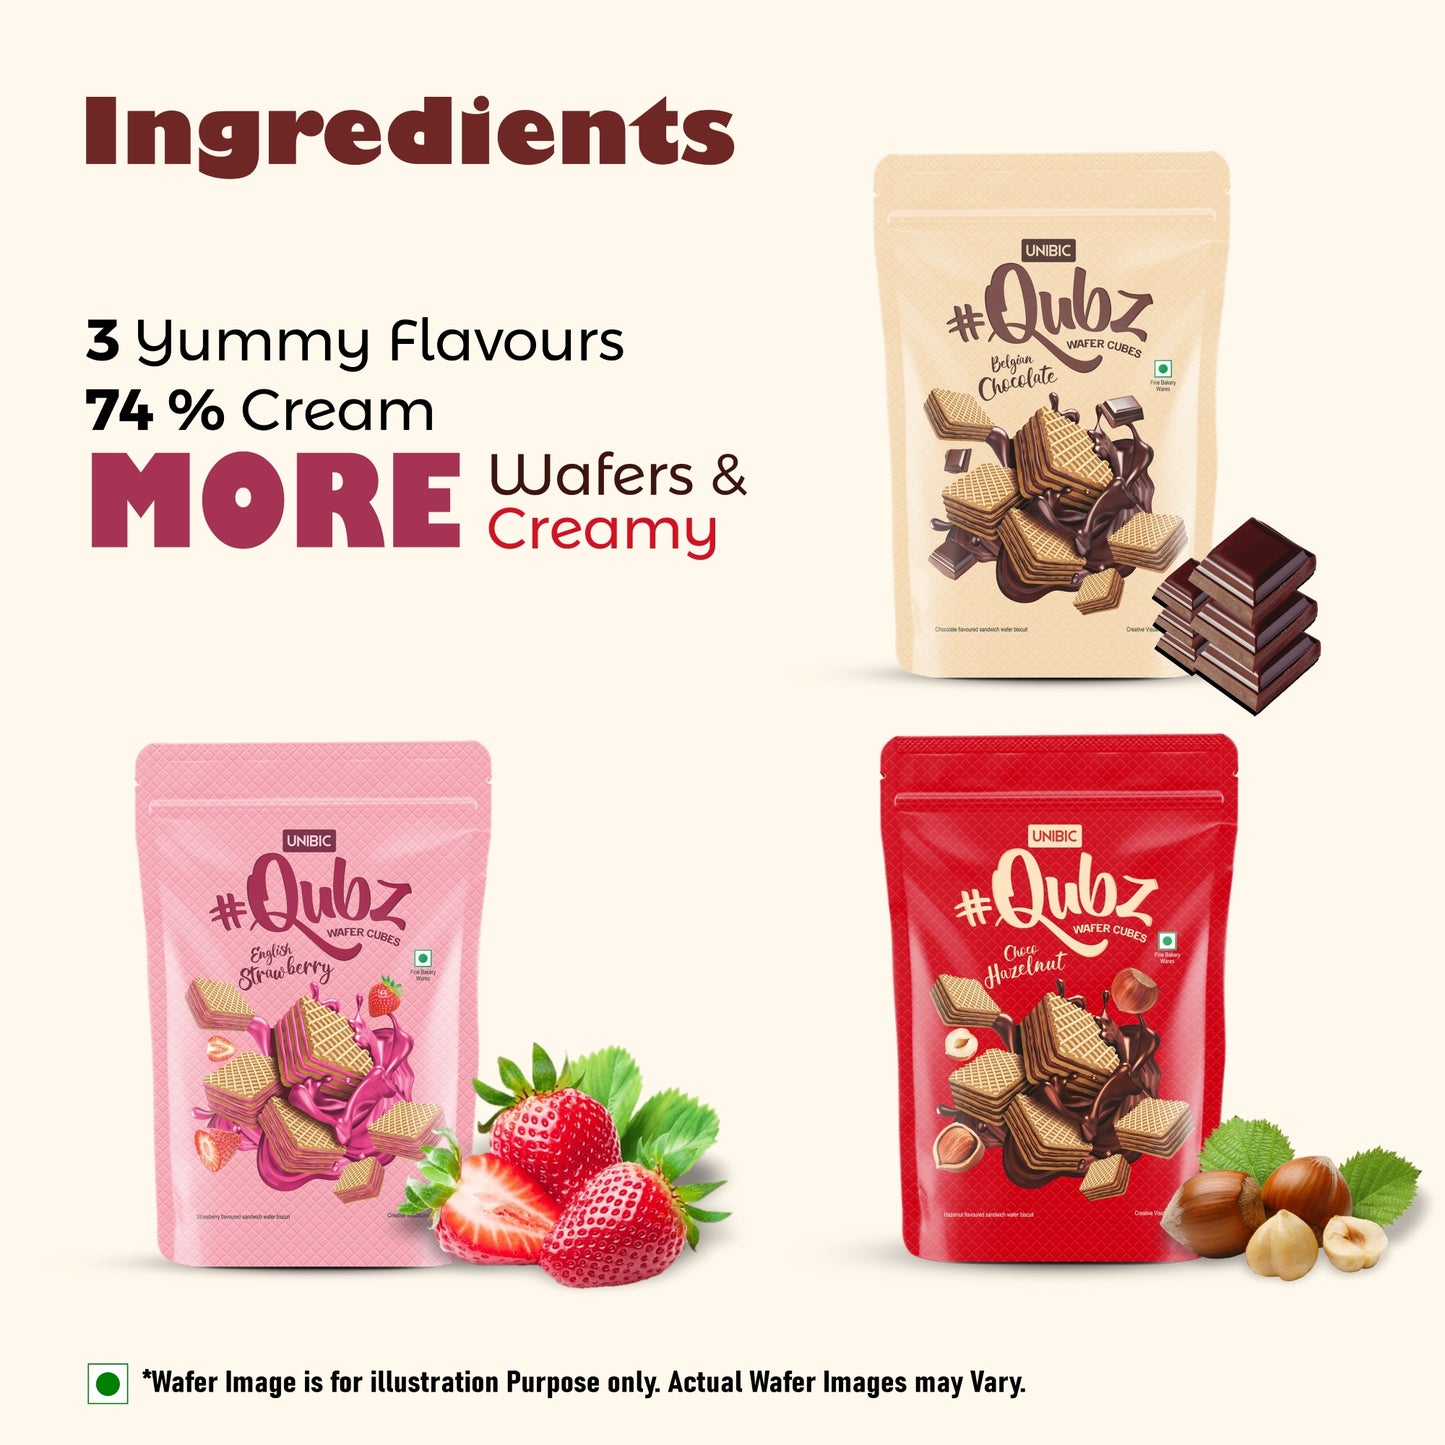 Qubz Assorted Packs (Pack of 3 ) 450g